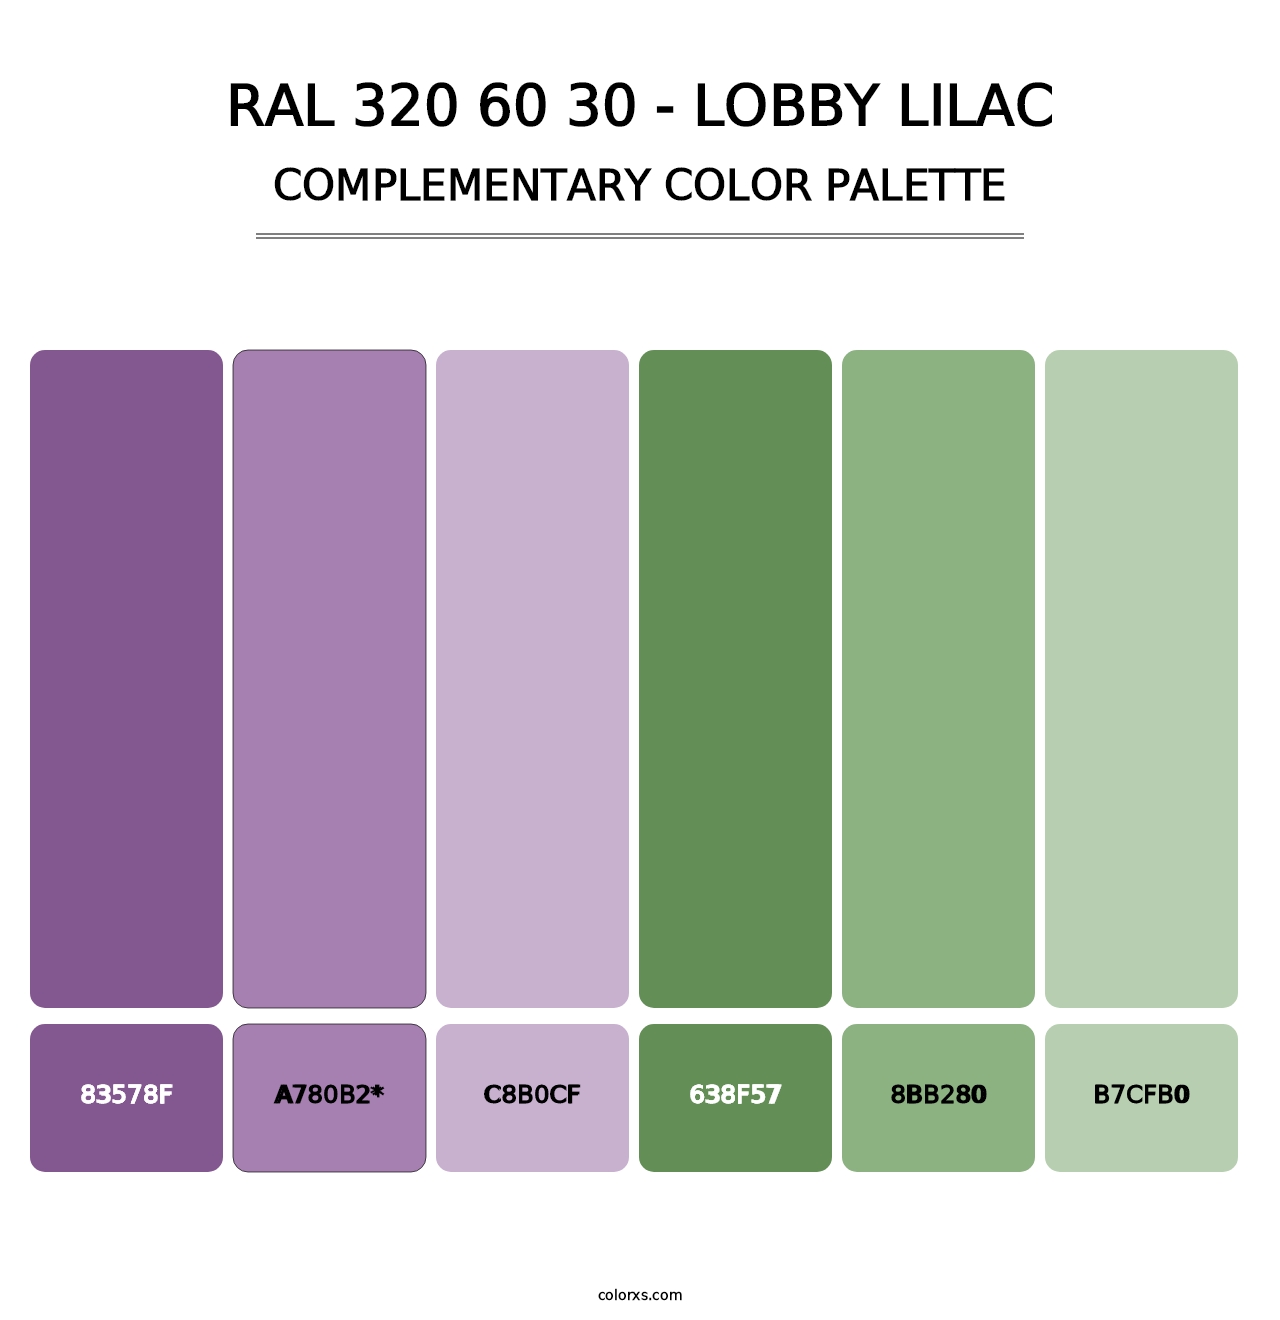 RAL 320 60 30 - Lobby Lilac - Complementary Color Palette